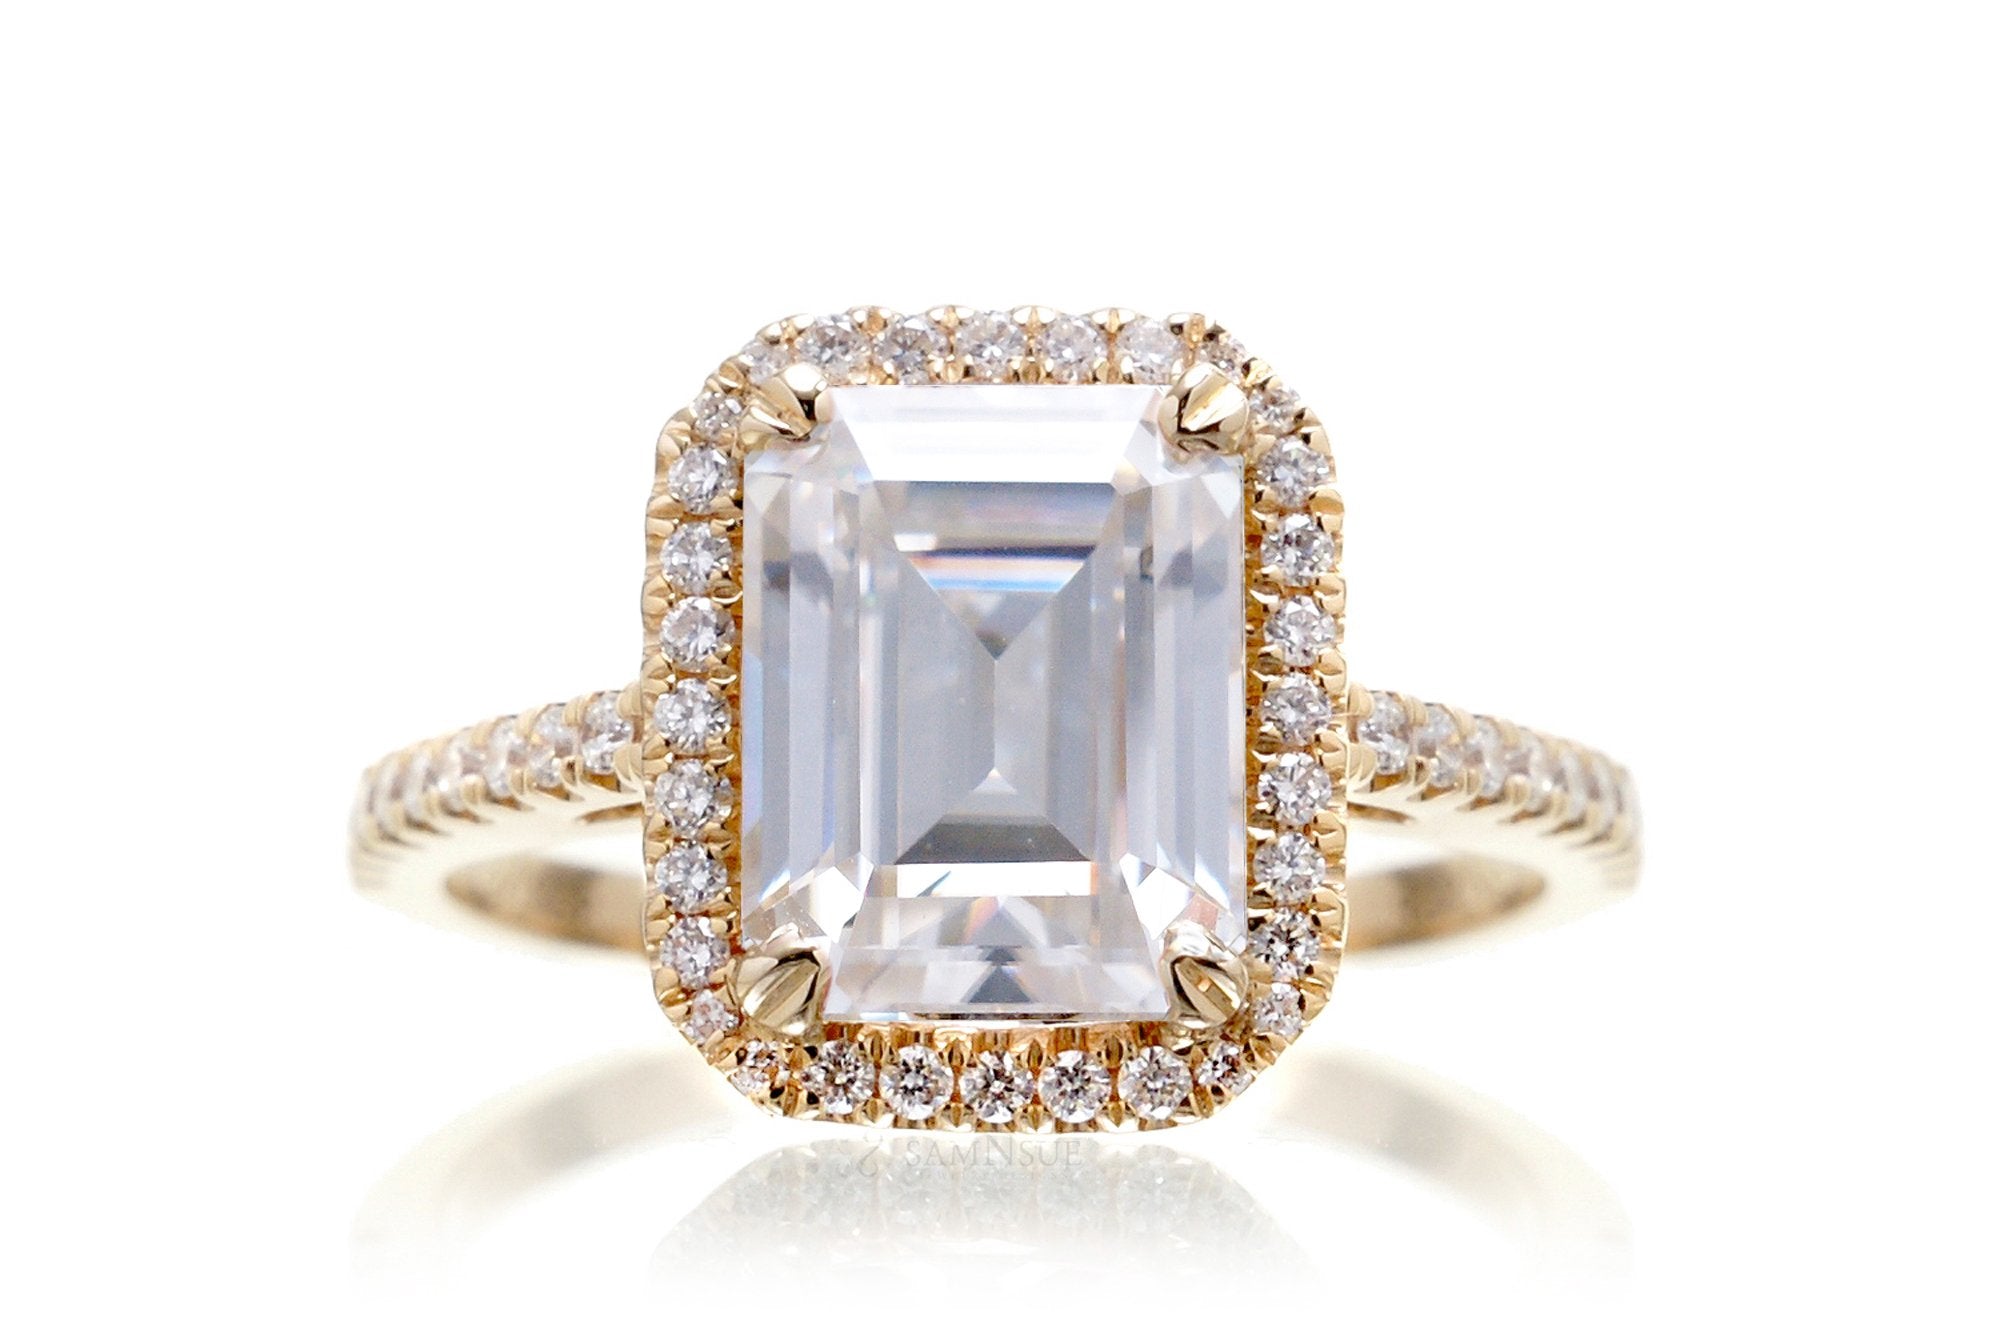 Emerald Cut Moissanite With Diamond Halo Ring | The Signature In Yellow Gold